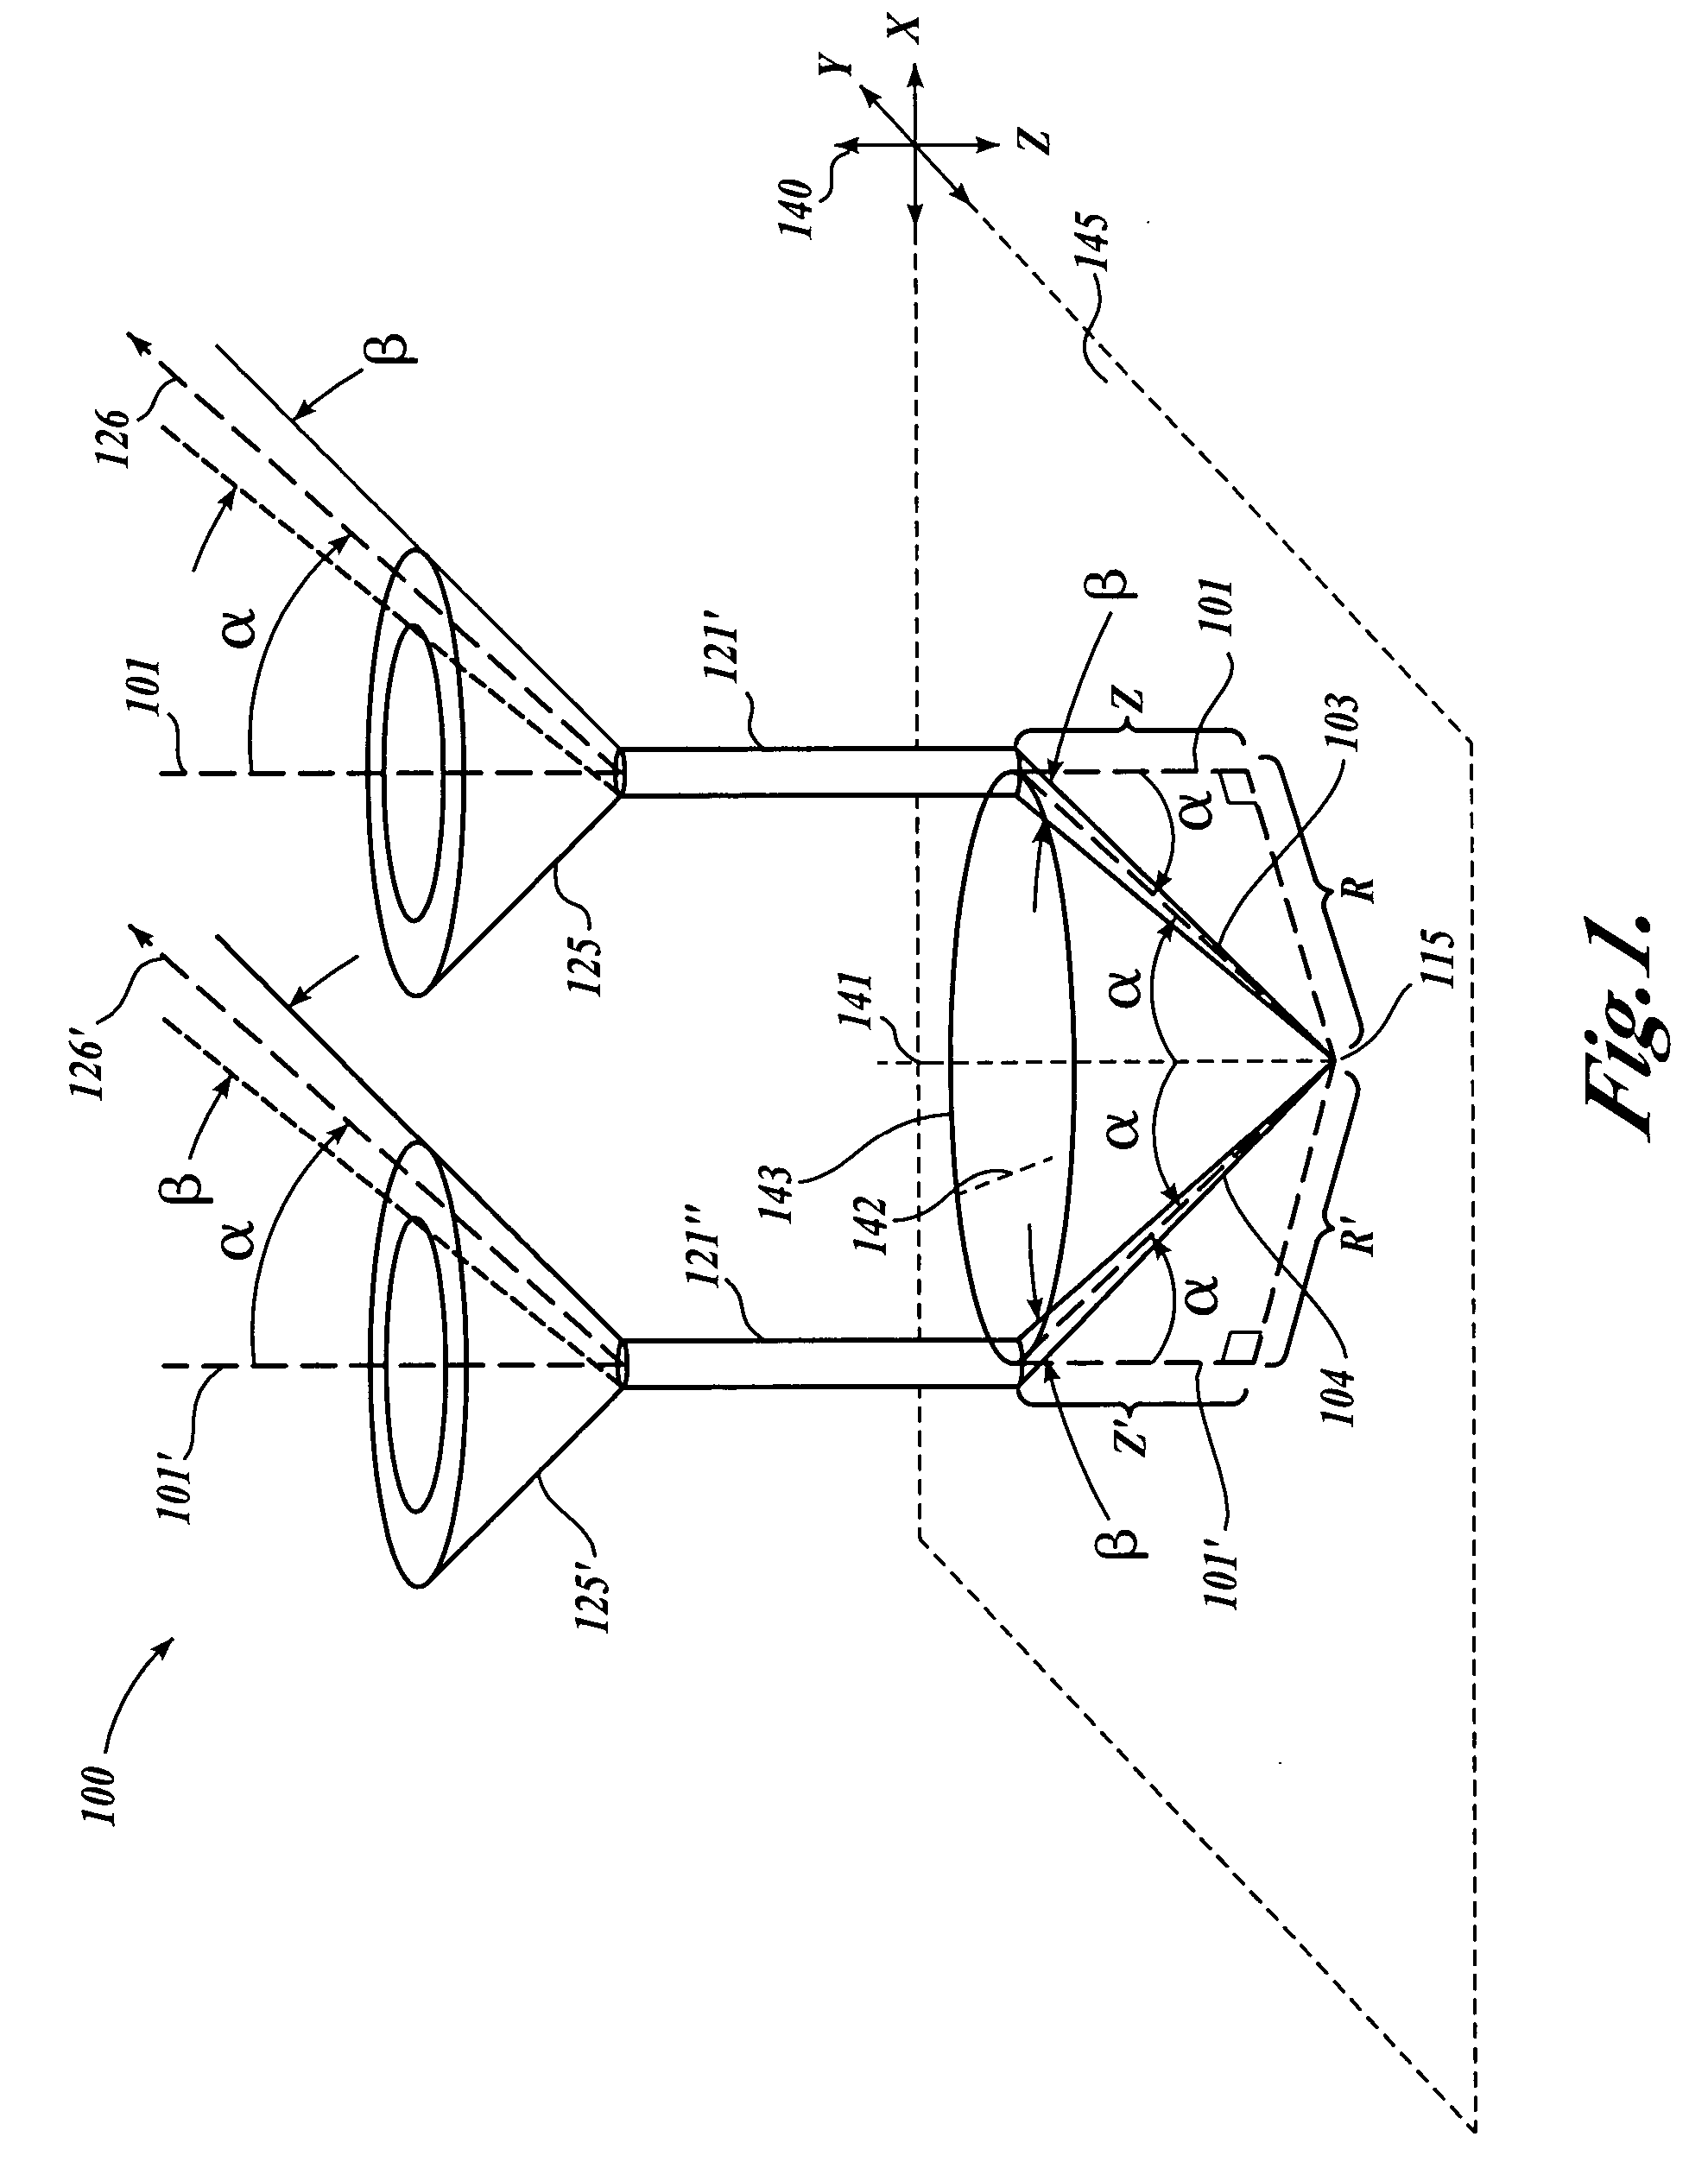 Optical path array and angular filter for translation and orientation sensing